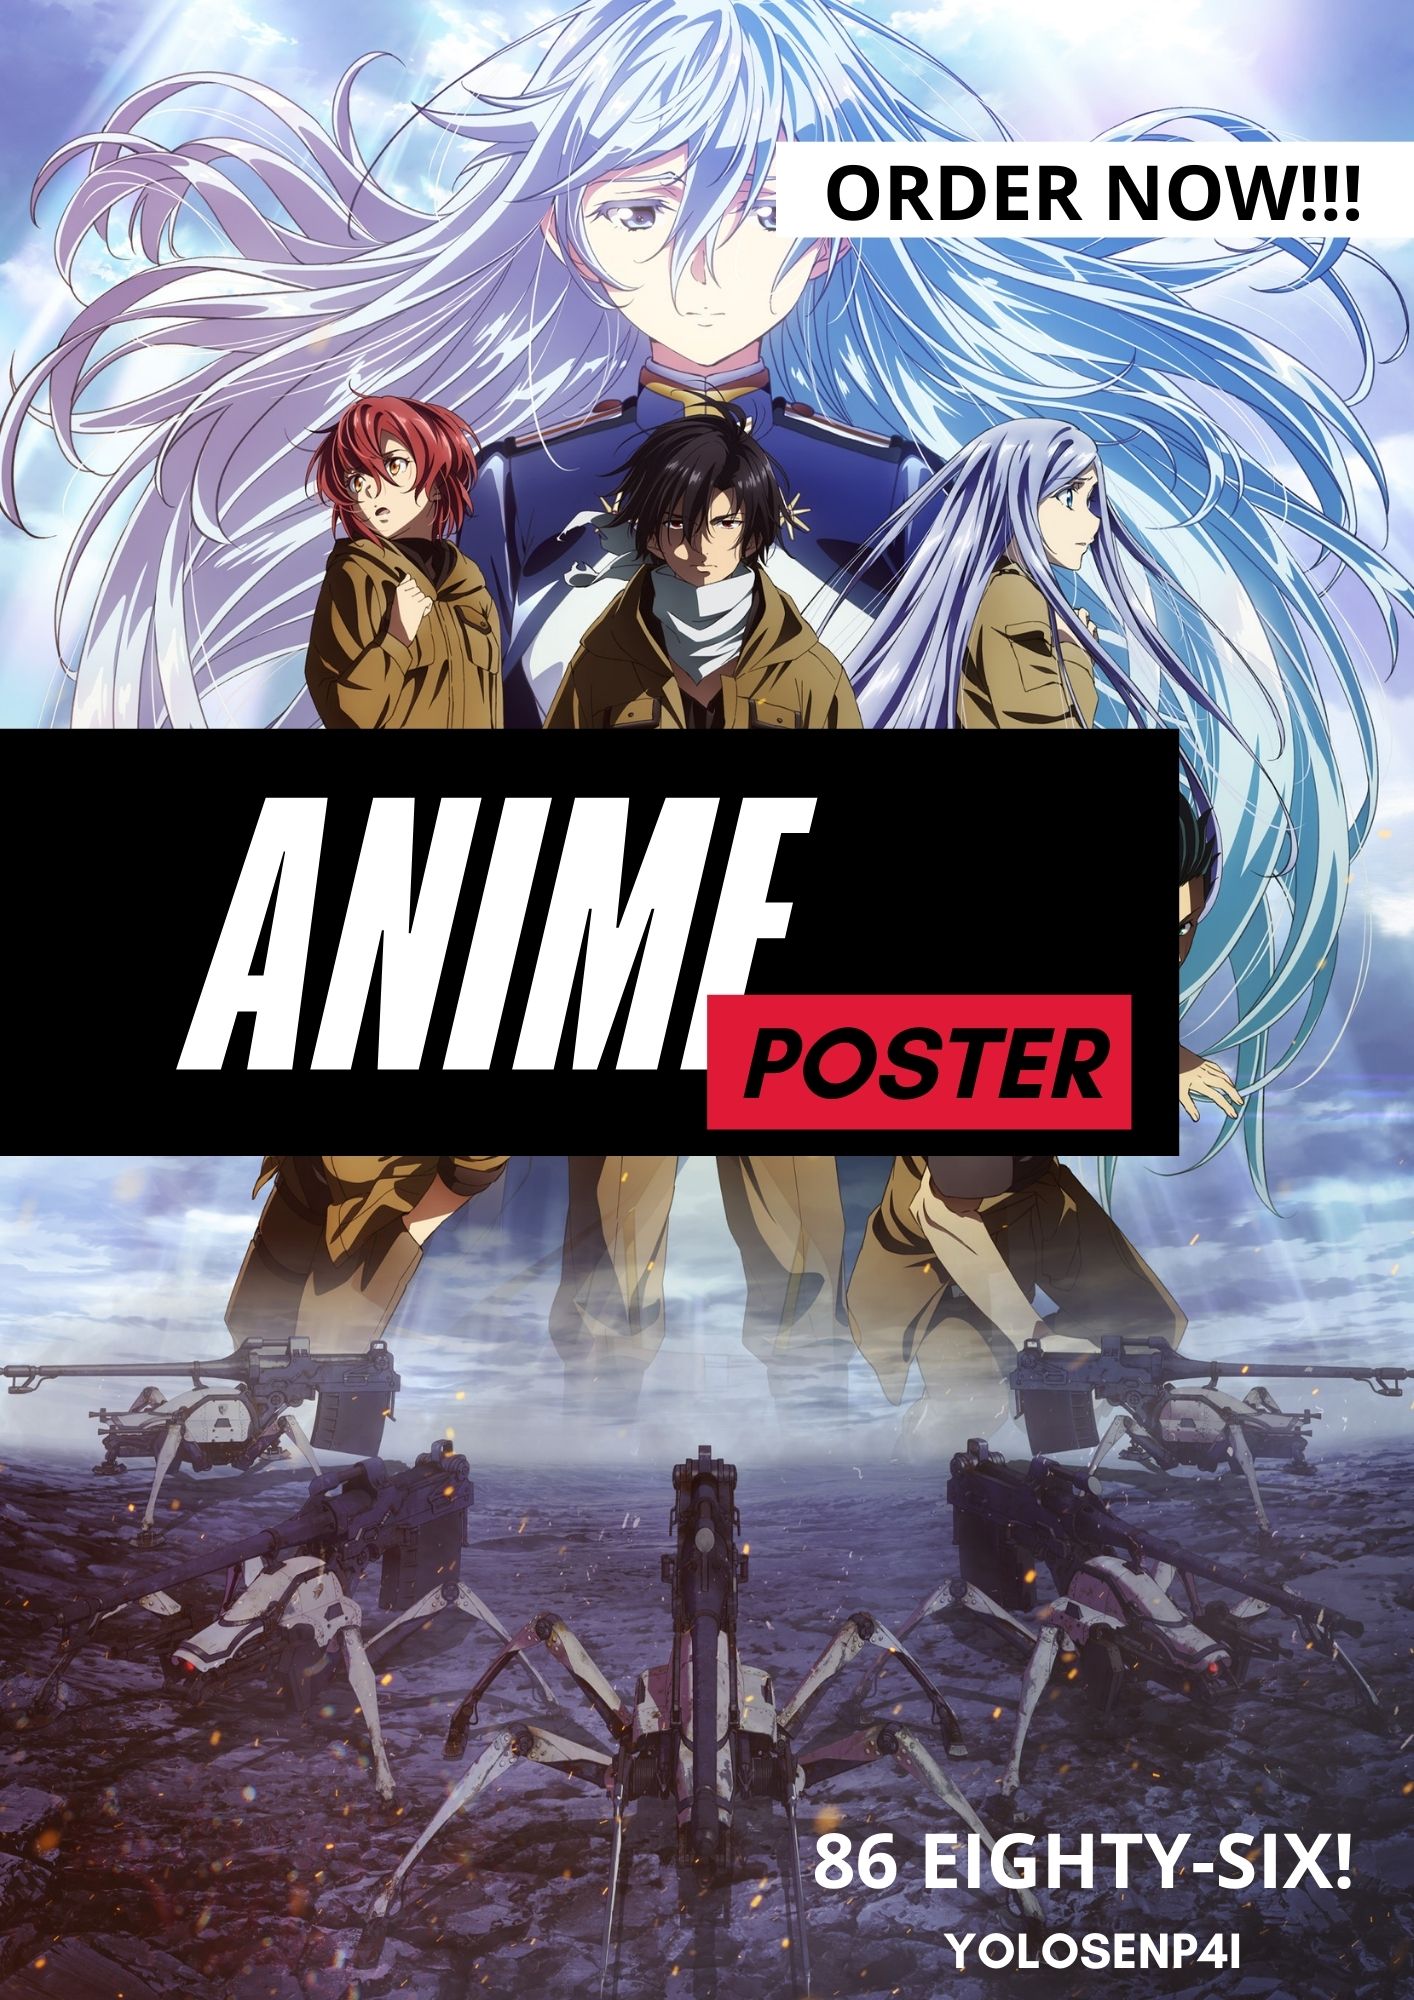 Amazon.com: 86 Eighty- Six Anime Fabric Wall Scroll Poster (16 x 23) Inches  [A] 86 Eighty-Six -2: Posters & Prints